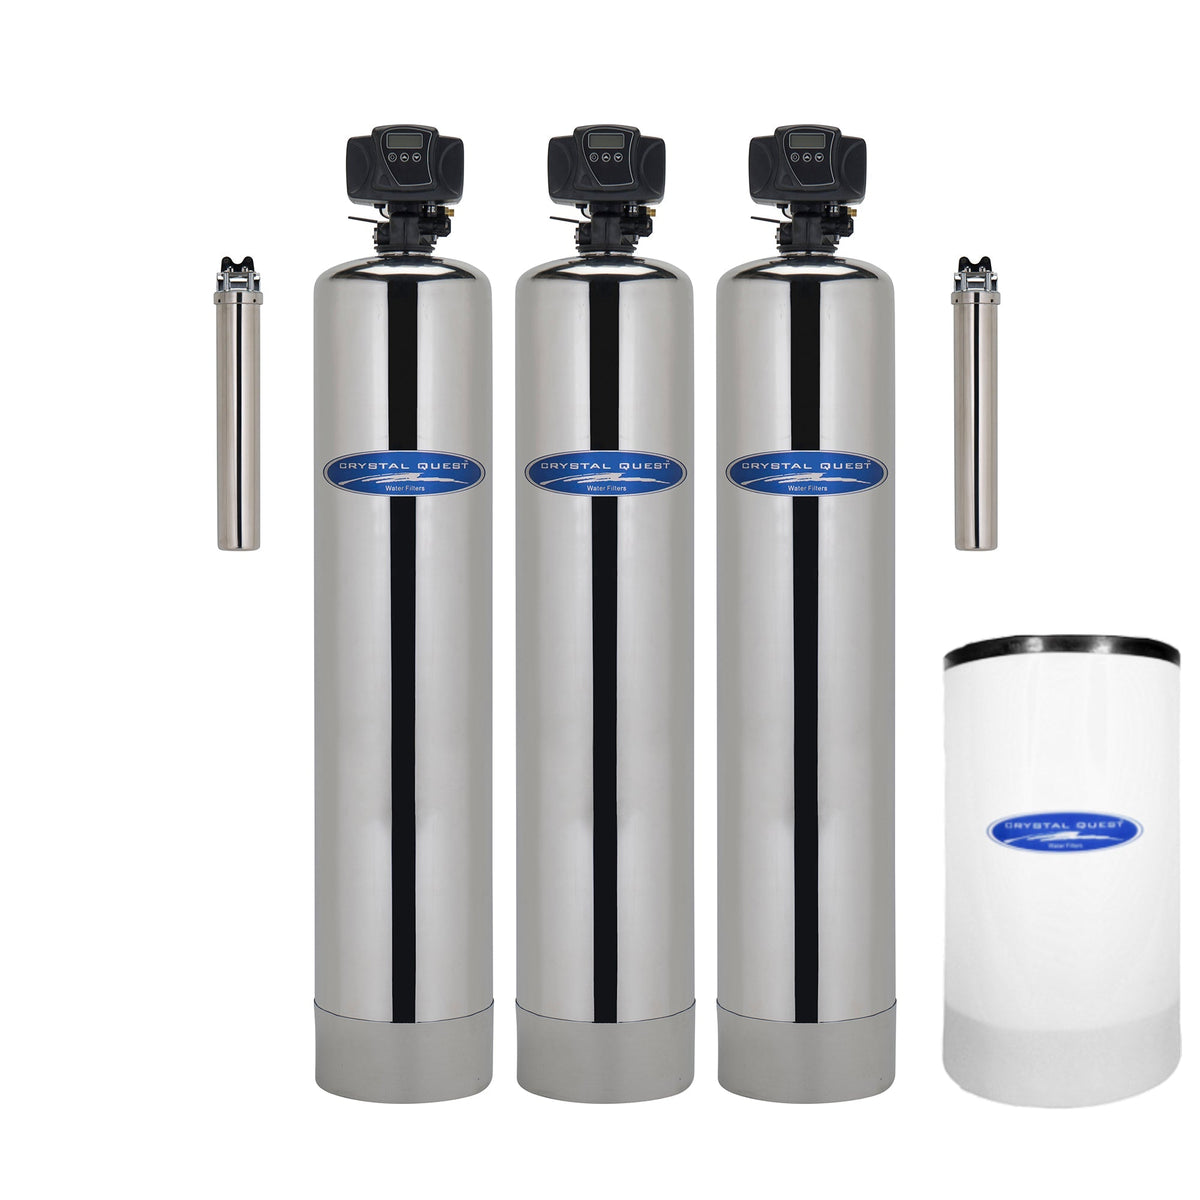 Add SMART Filter and Softener / Stainless Steel / 1.5 Fluoride Whole House Water Filter - Whole House Water Filters - Crystal Quest